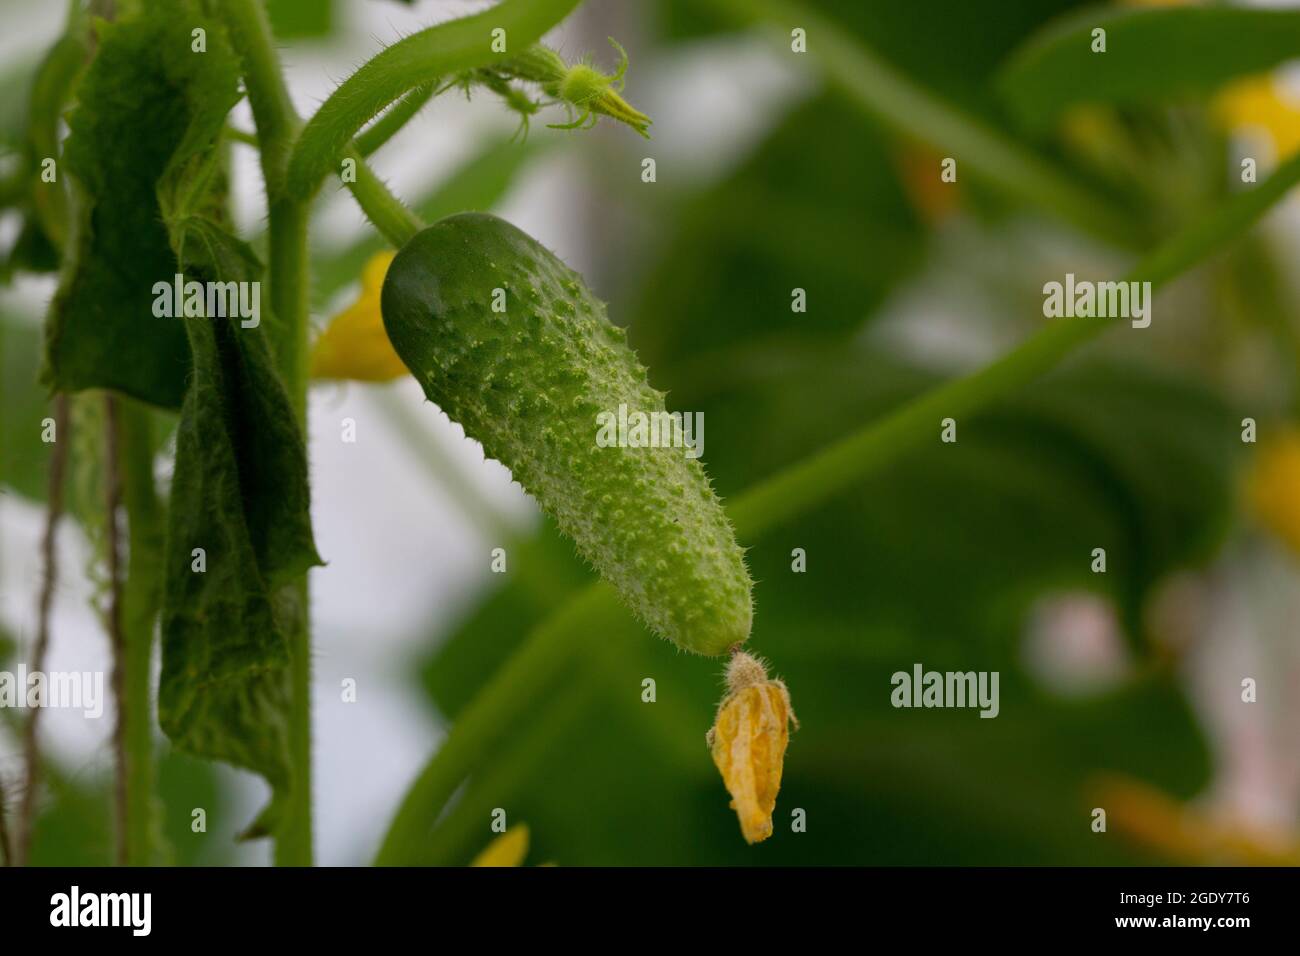 A green cucumber with flowers growing in a garden or in a greenhouse. The concept of harvesting. Stock Photo